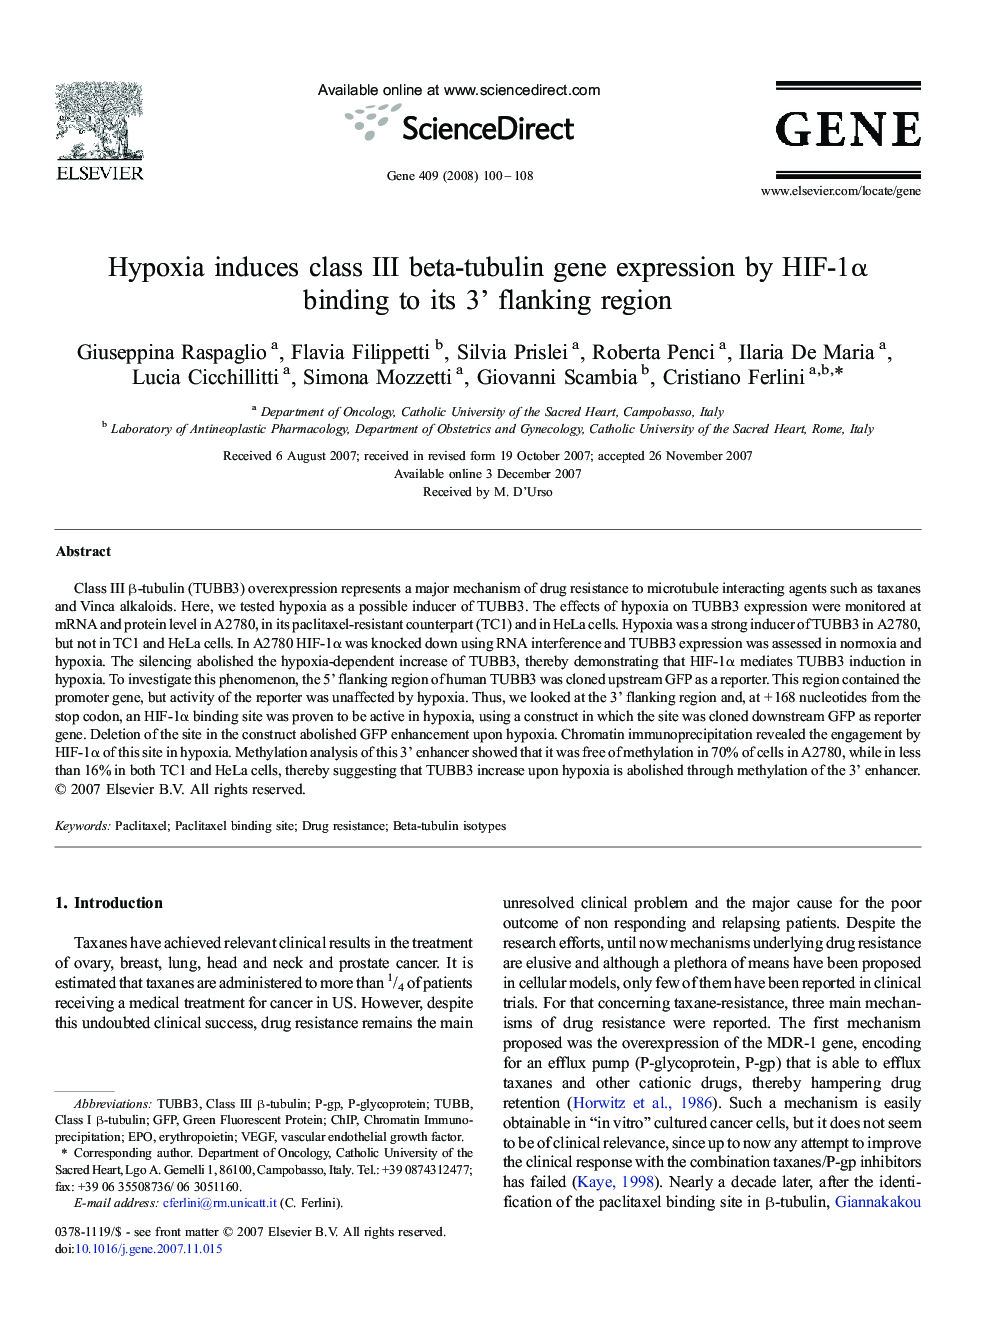 Hypoxia induces class III beta-tubulin gene expression by HIF-1α binding to its 3' flanking region